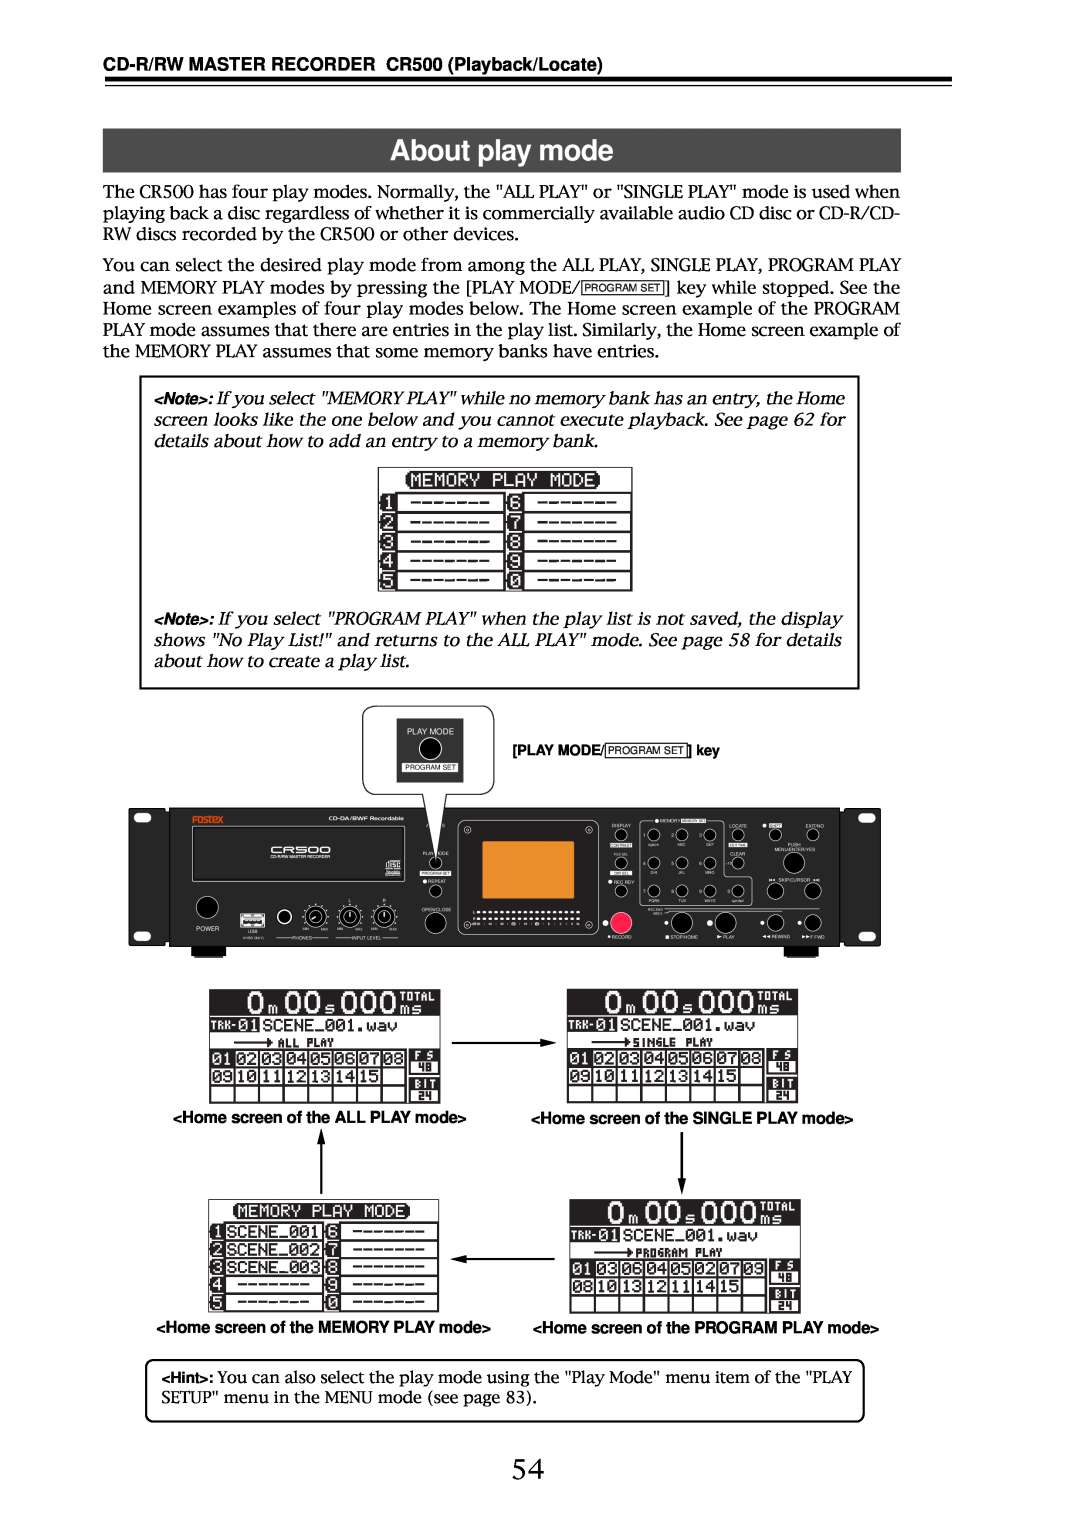 Fostex owner manual About play mode, CD-R/RWMASTER RECORDER CR500 Playback/Locate, Home screen of the ALL PLAY mode 